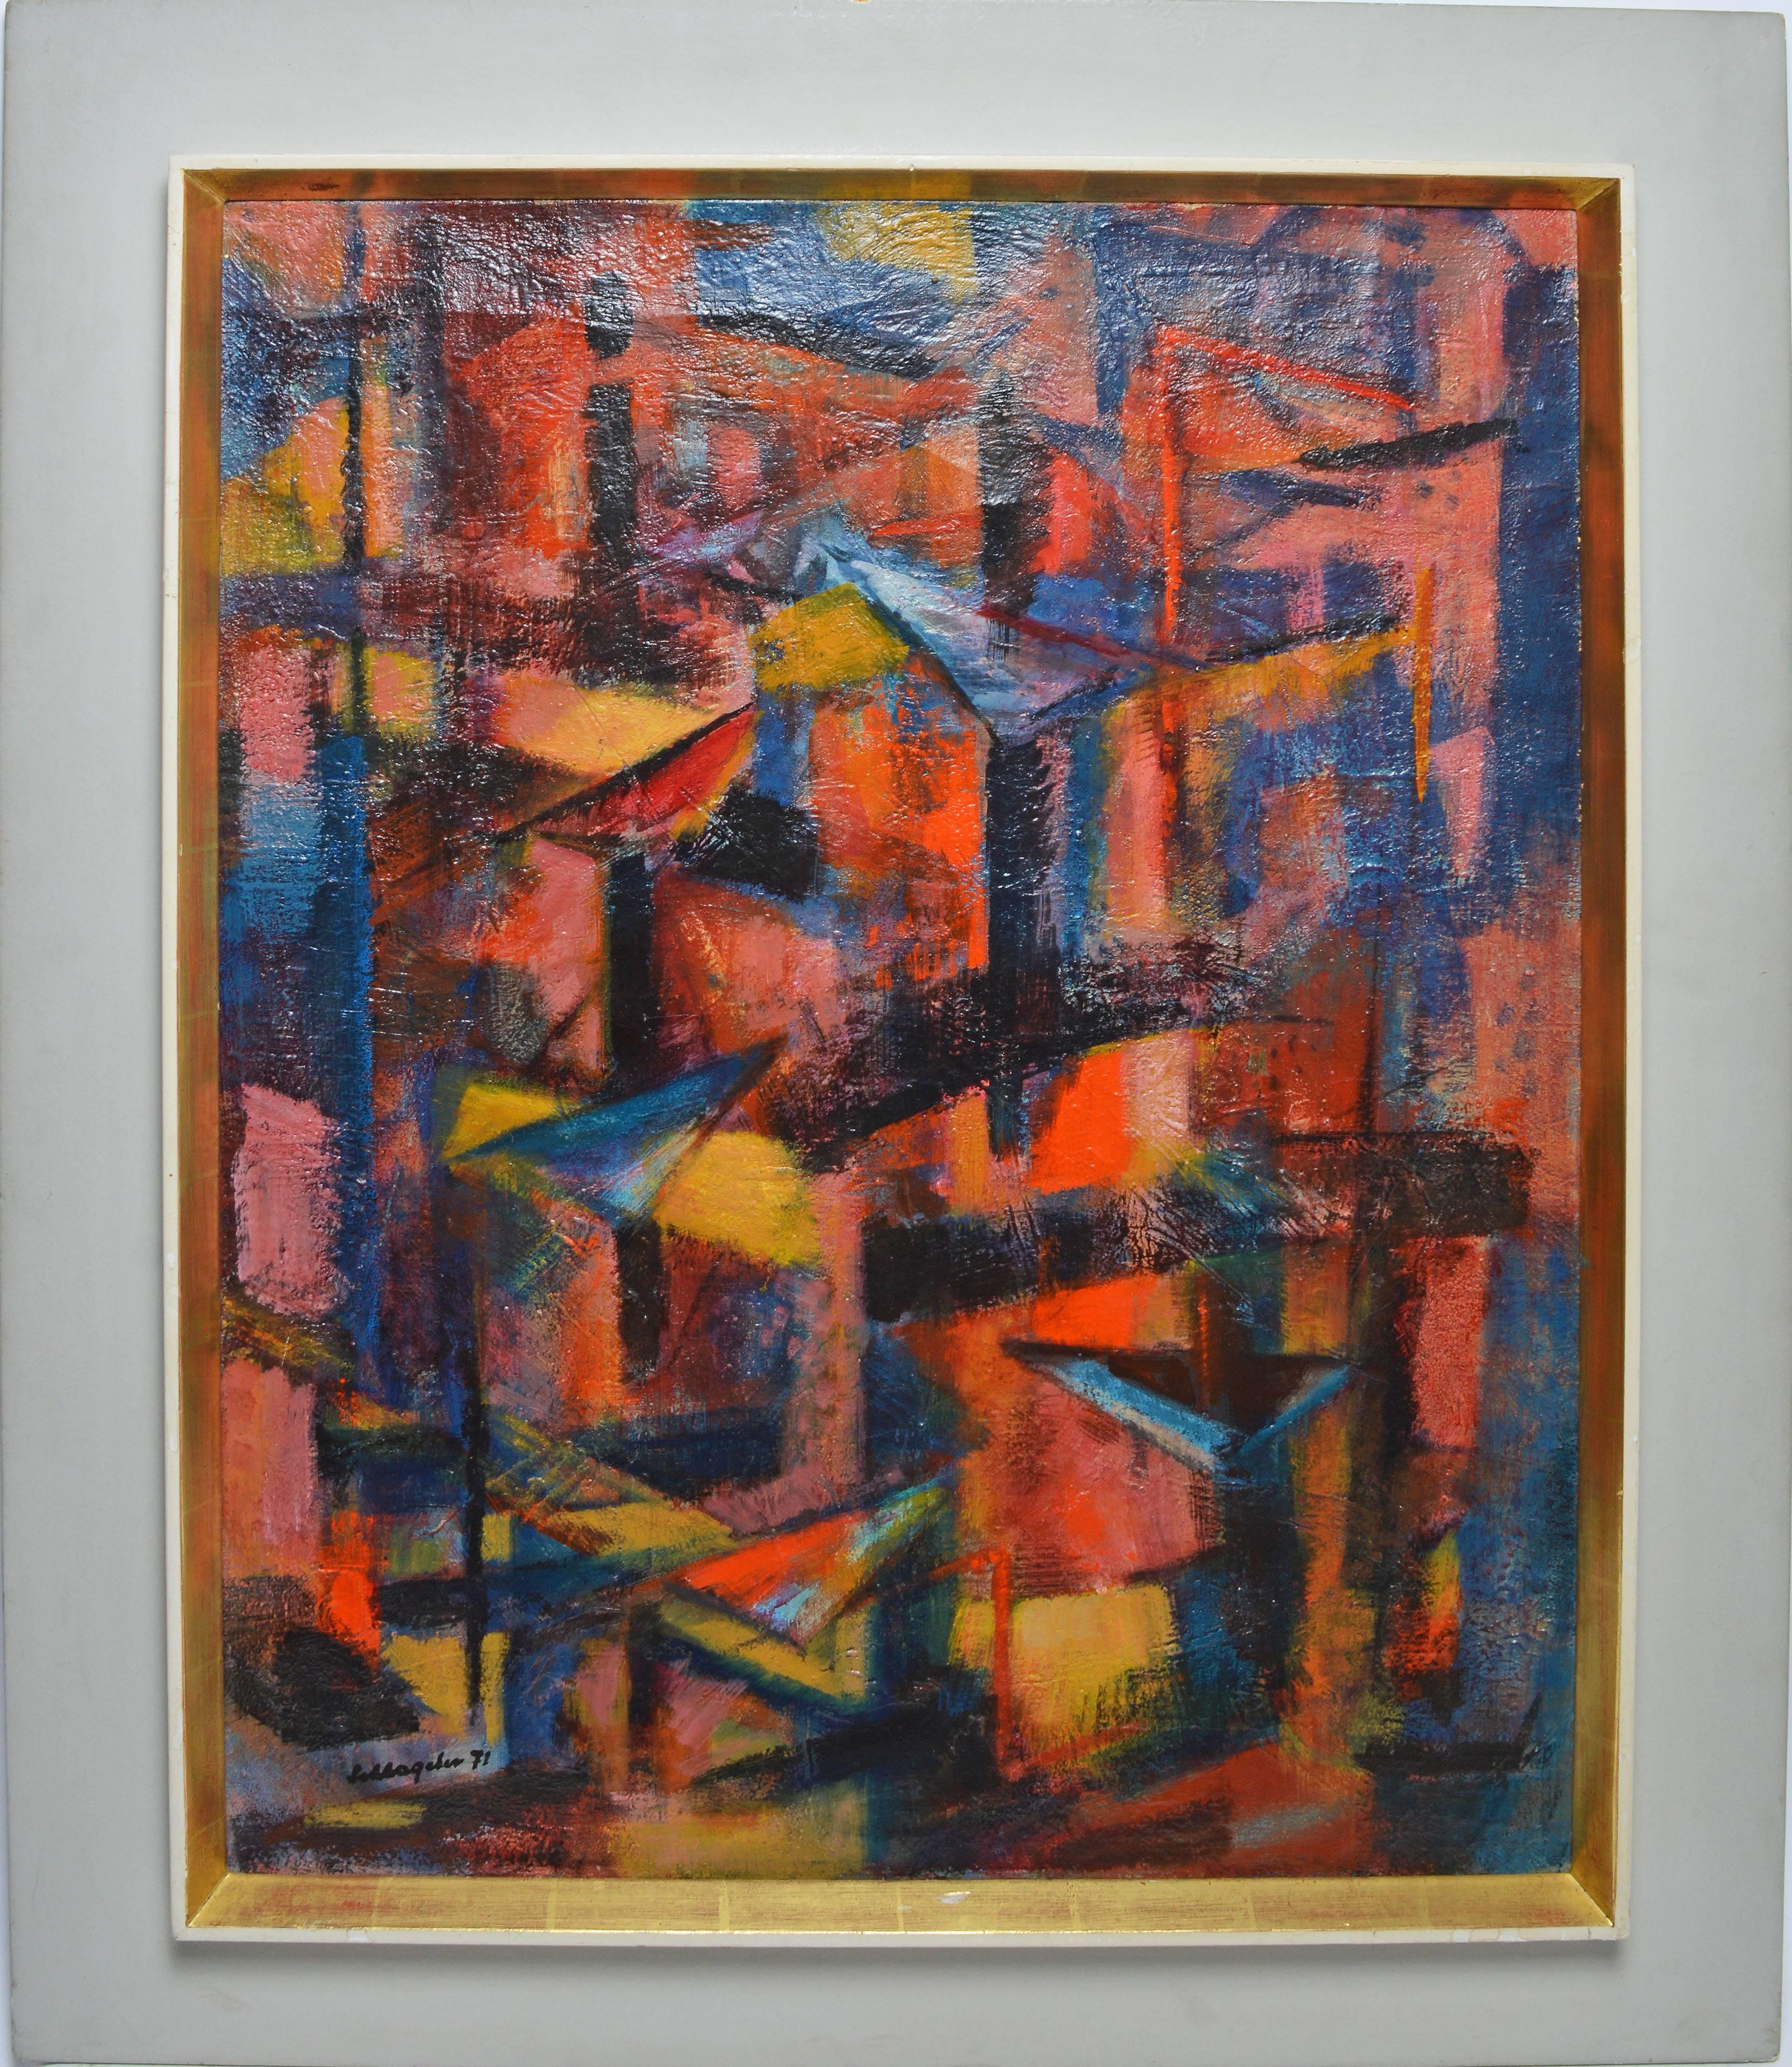 Abstract expressionist composition by Karl Schlageter  (1894 - 1990).  Oil on canvas, circa 1950.  Signed.  Displayed in a white modernist frame.  Image size, 24"L x 32"H, overall 31"L x 39"H.